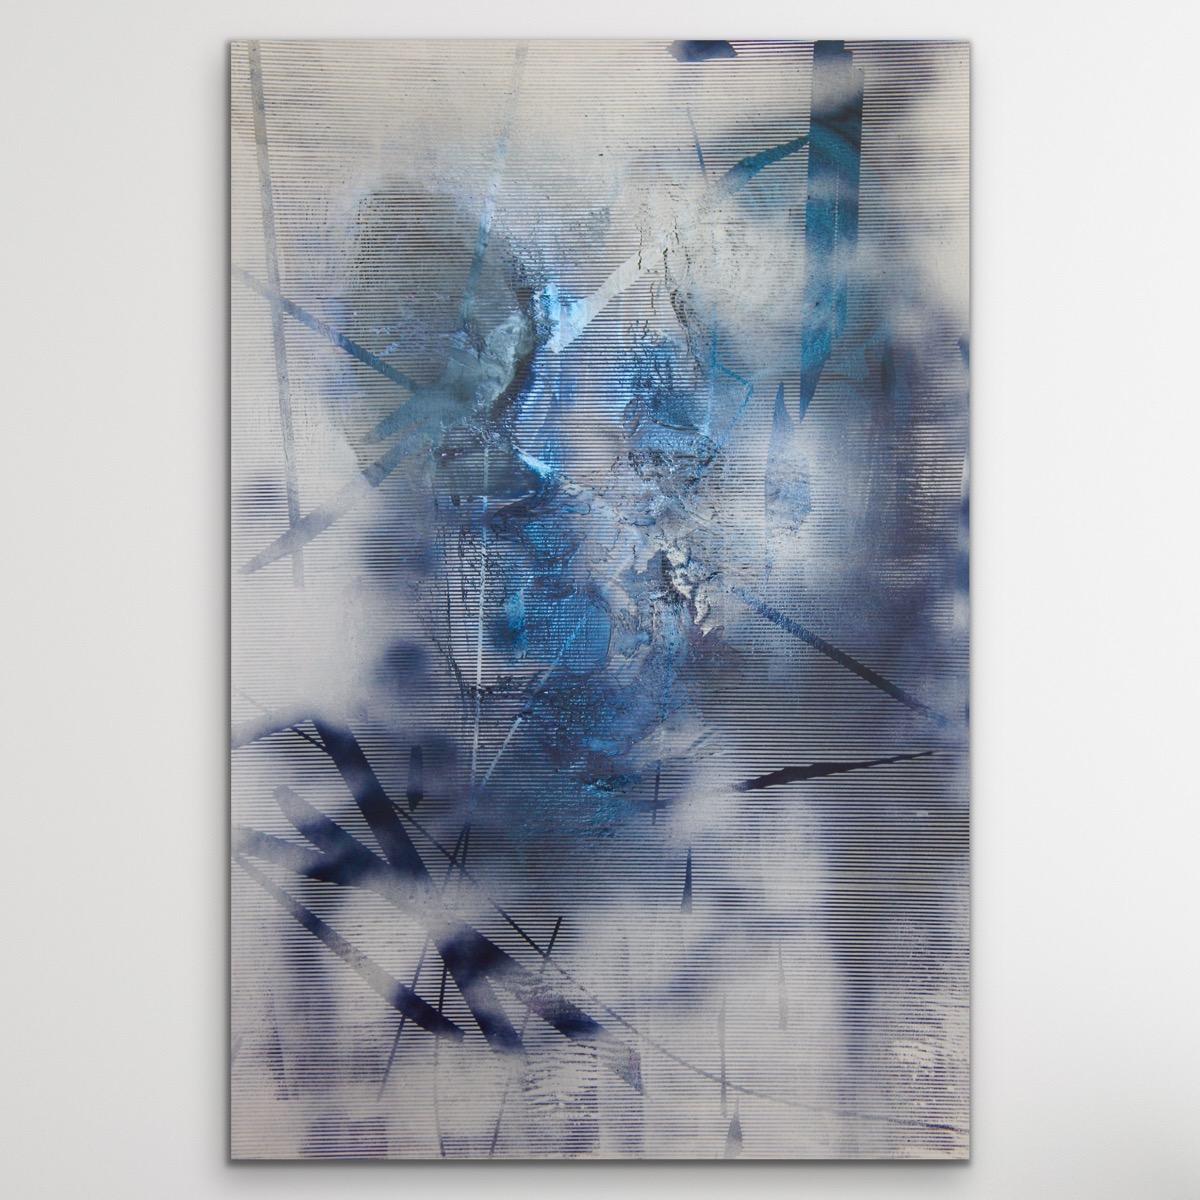 Screen tbd4 (abstract grid painting contemporary blue white atmospheric art) - Mixed Media Art by Melisa Taylor Metzger